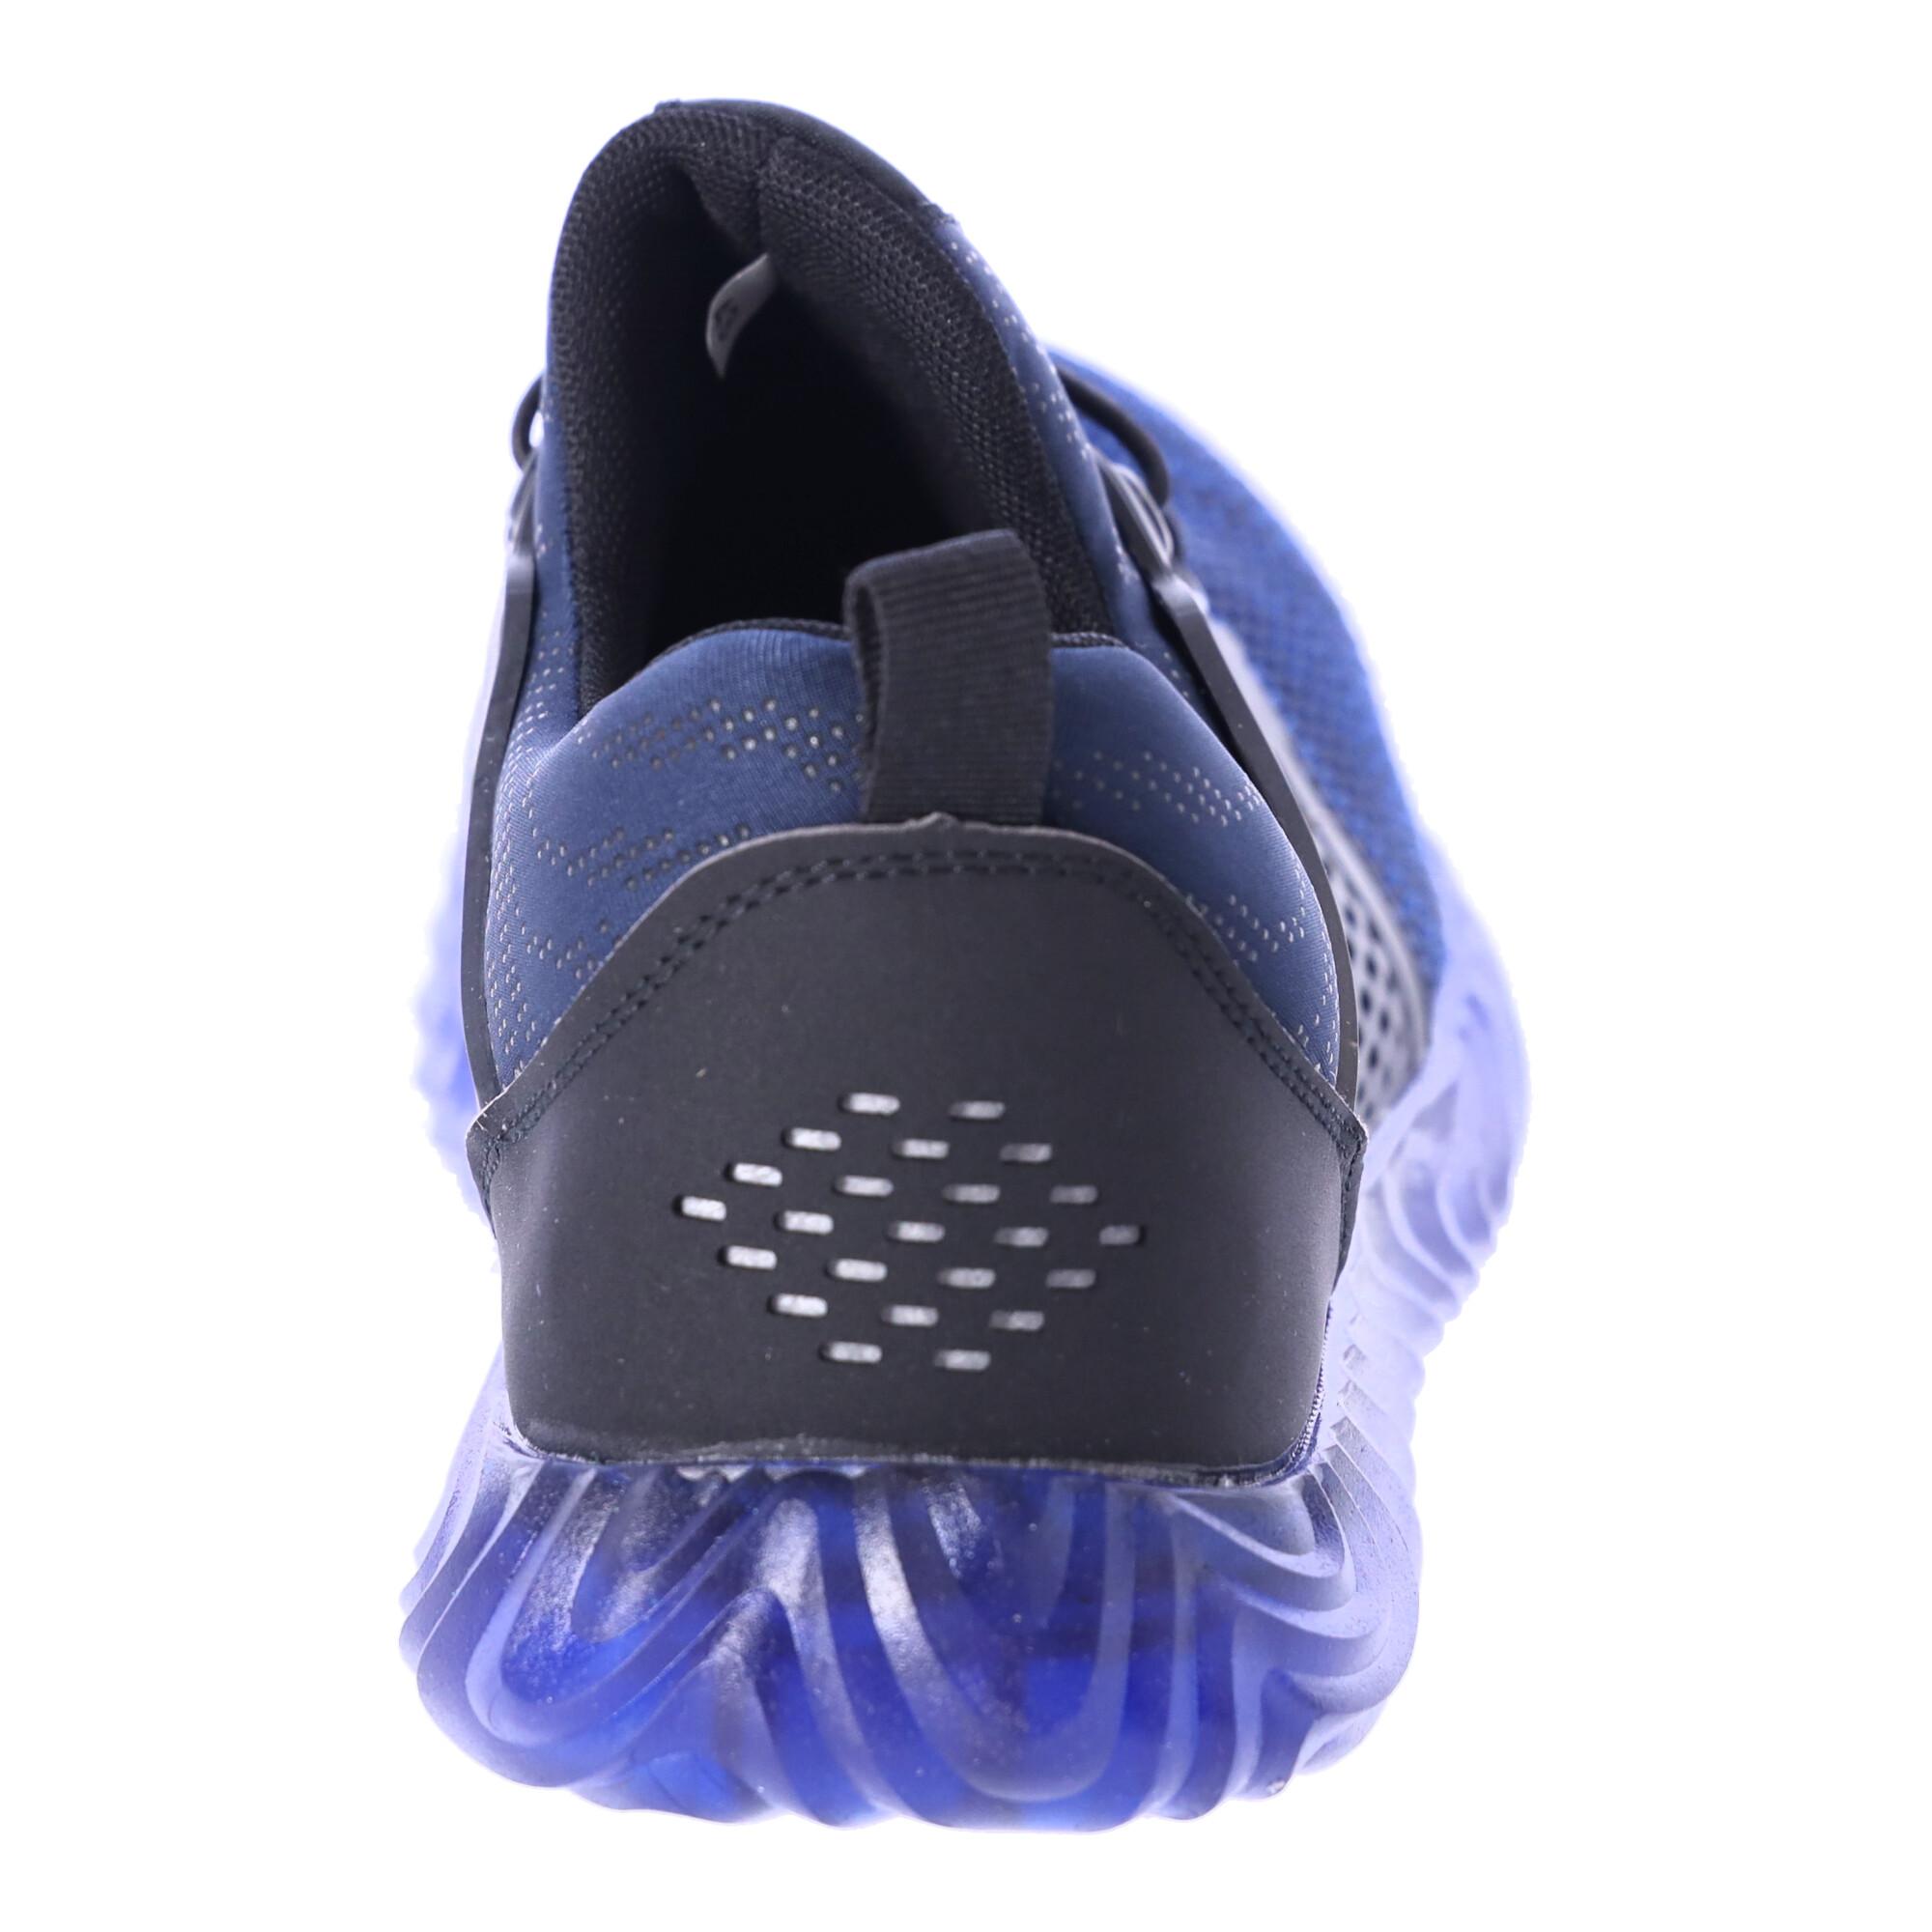 Work safety shoes "39" - navy blue